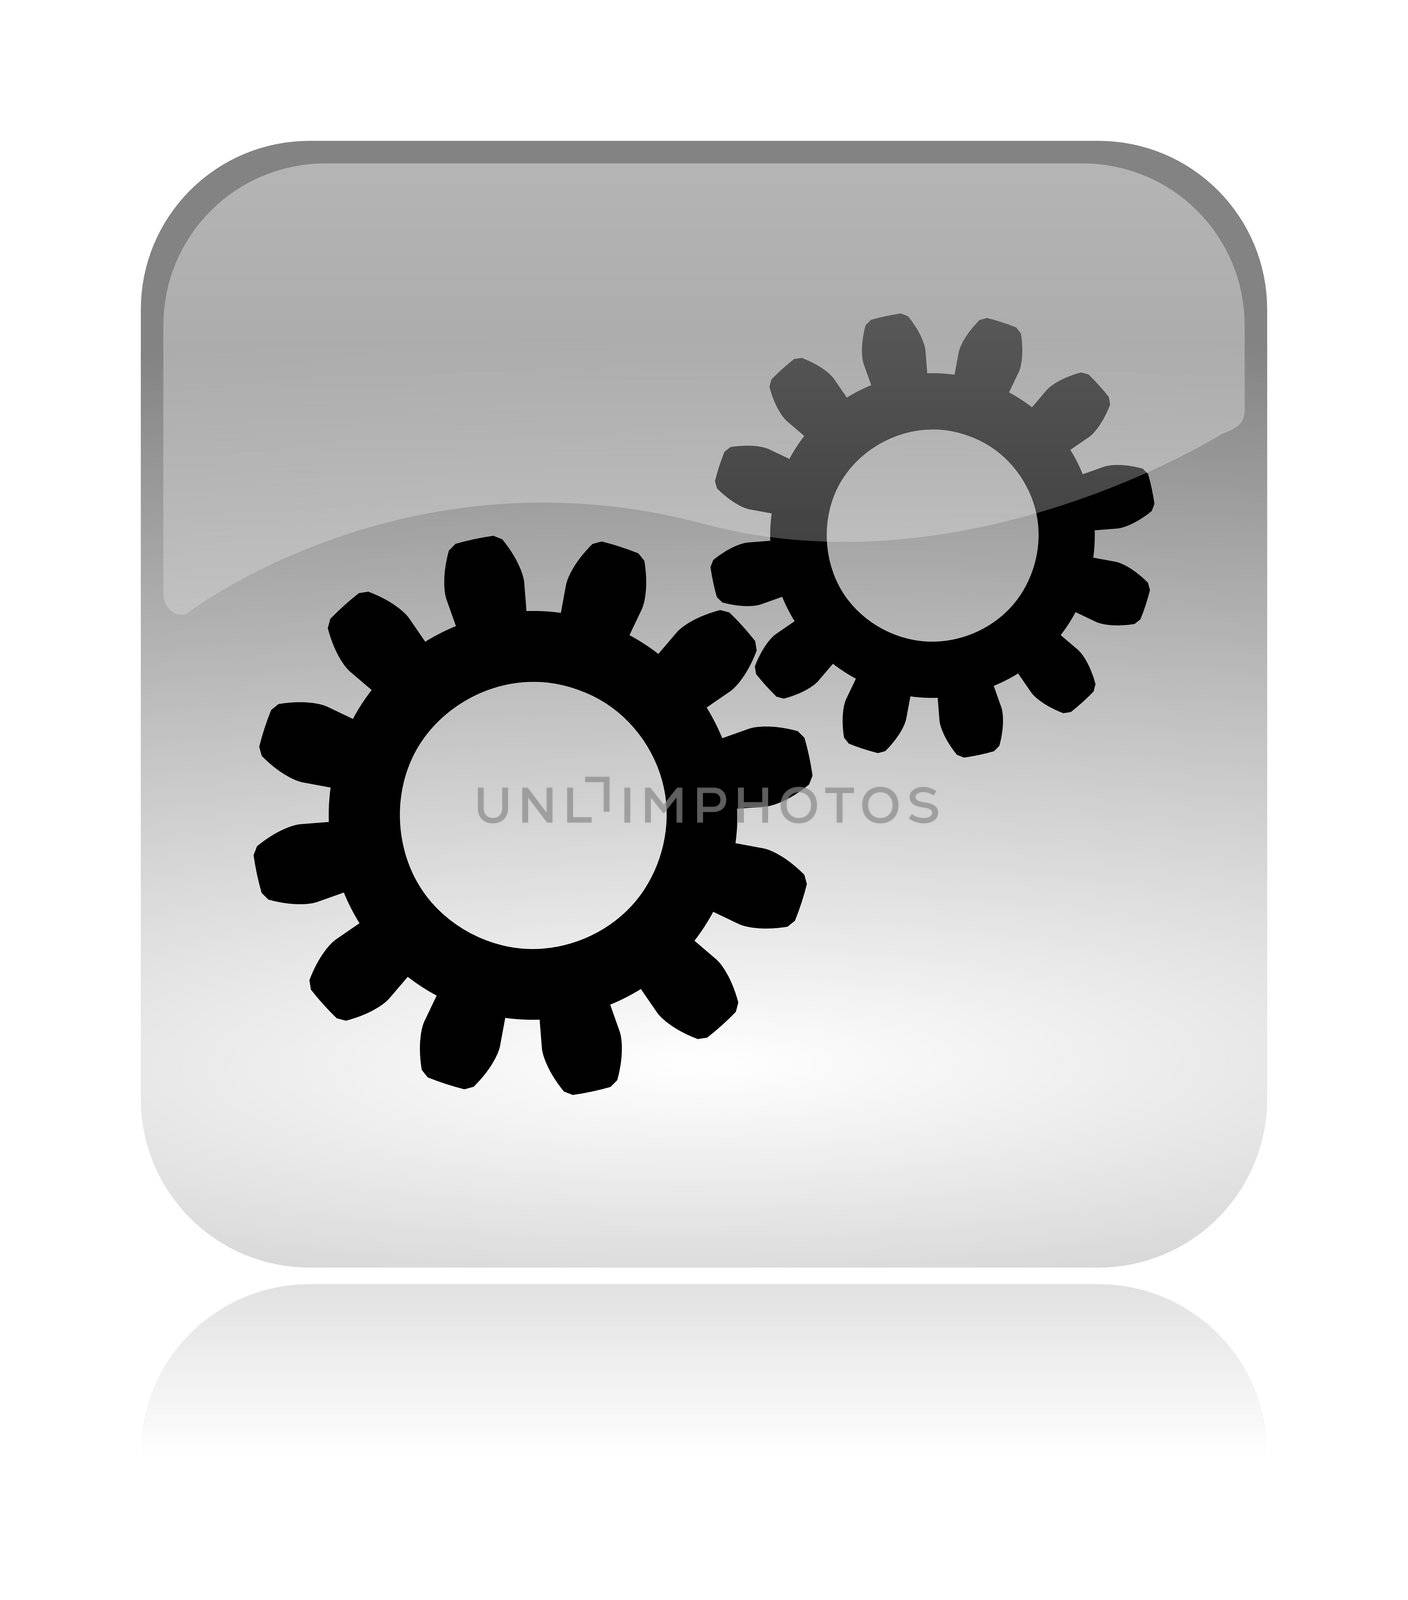 Gears web interface icon by make